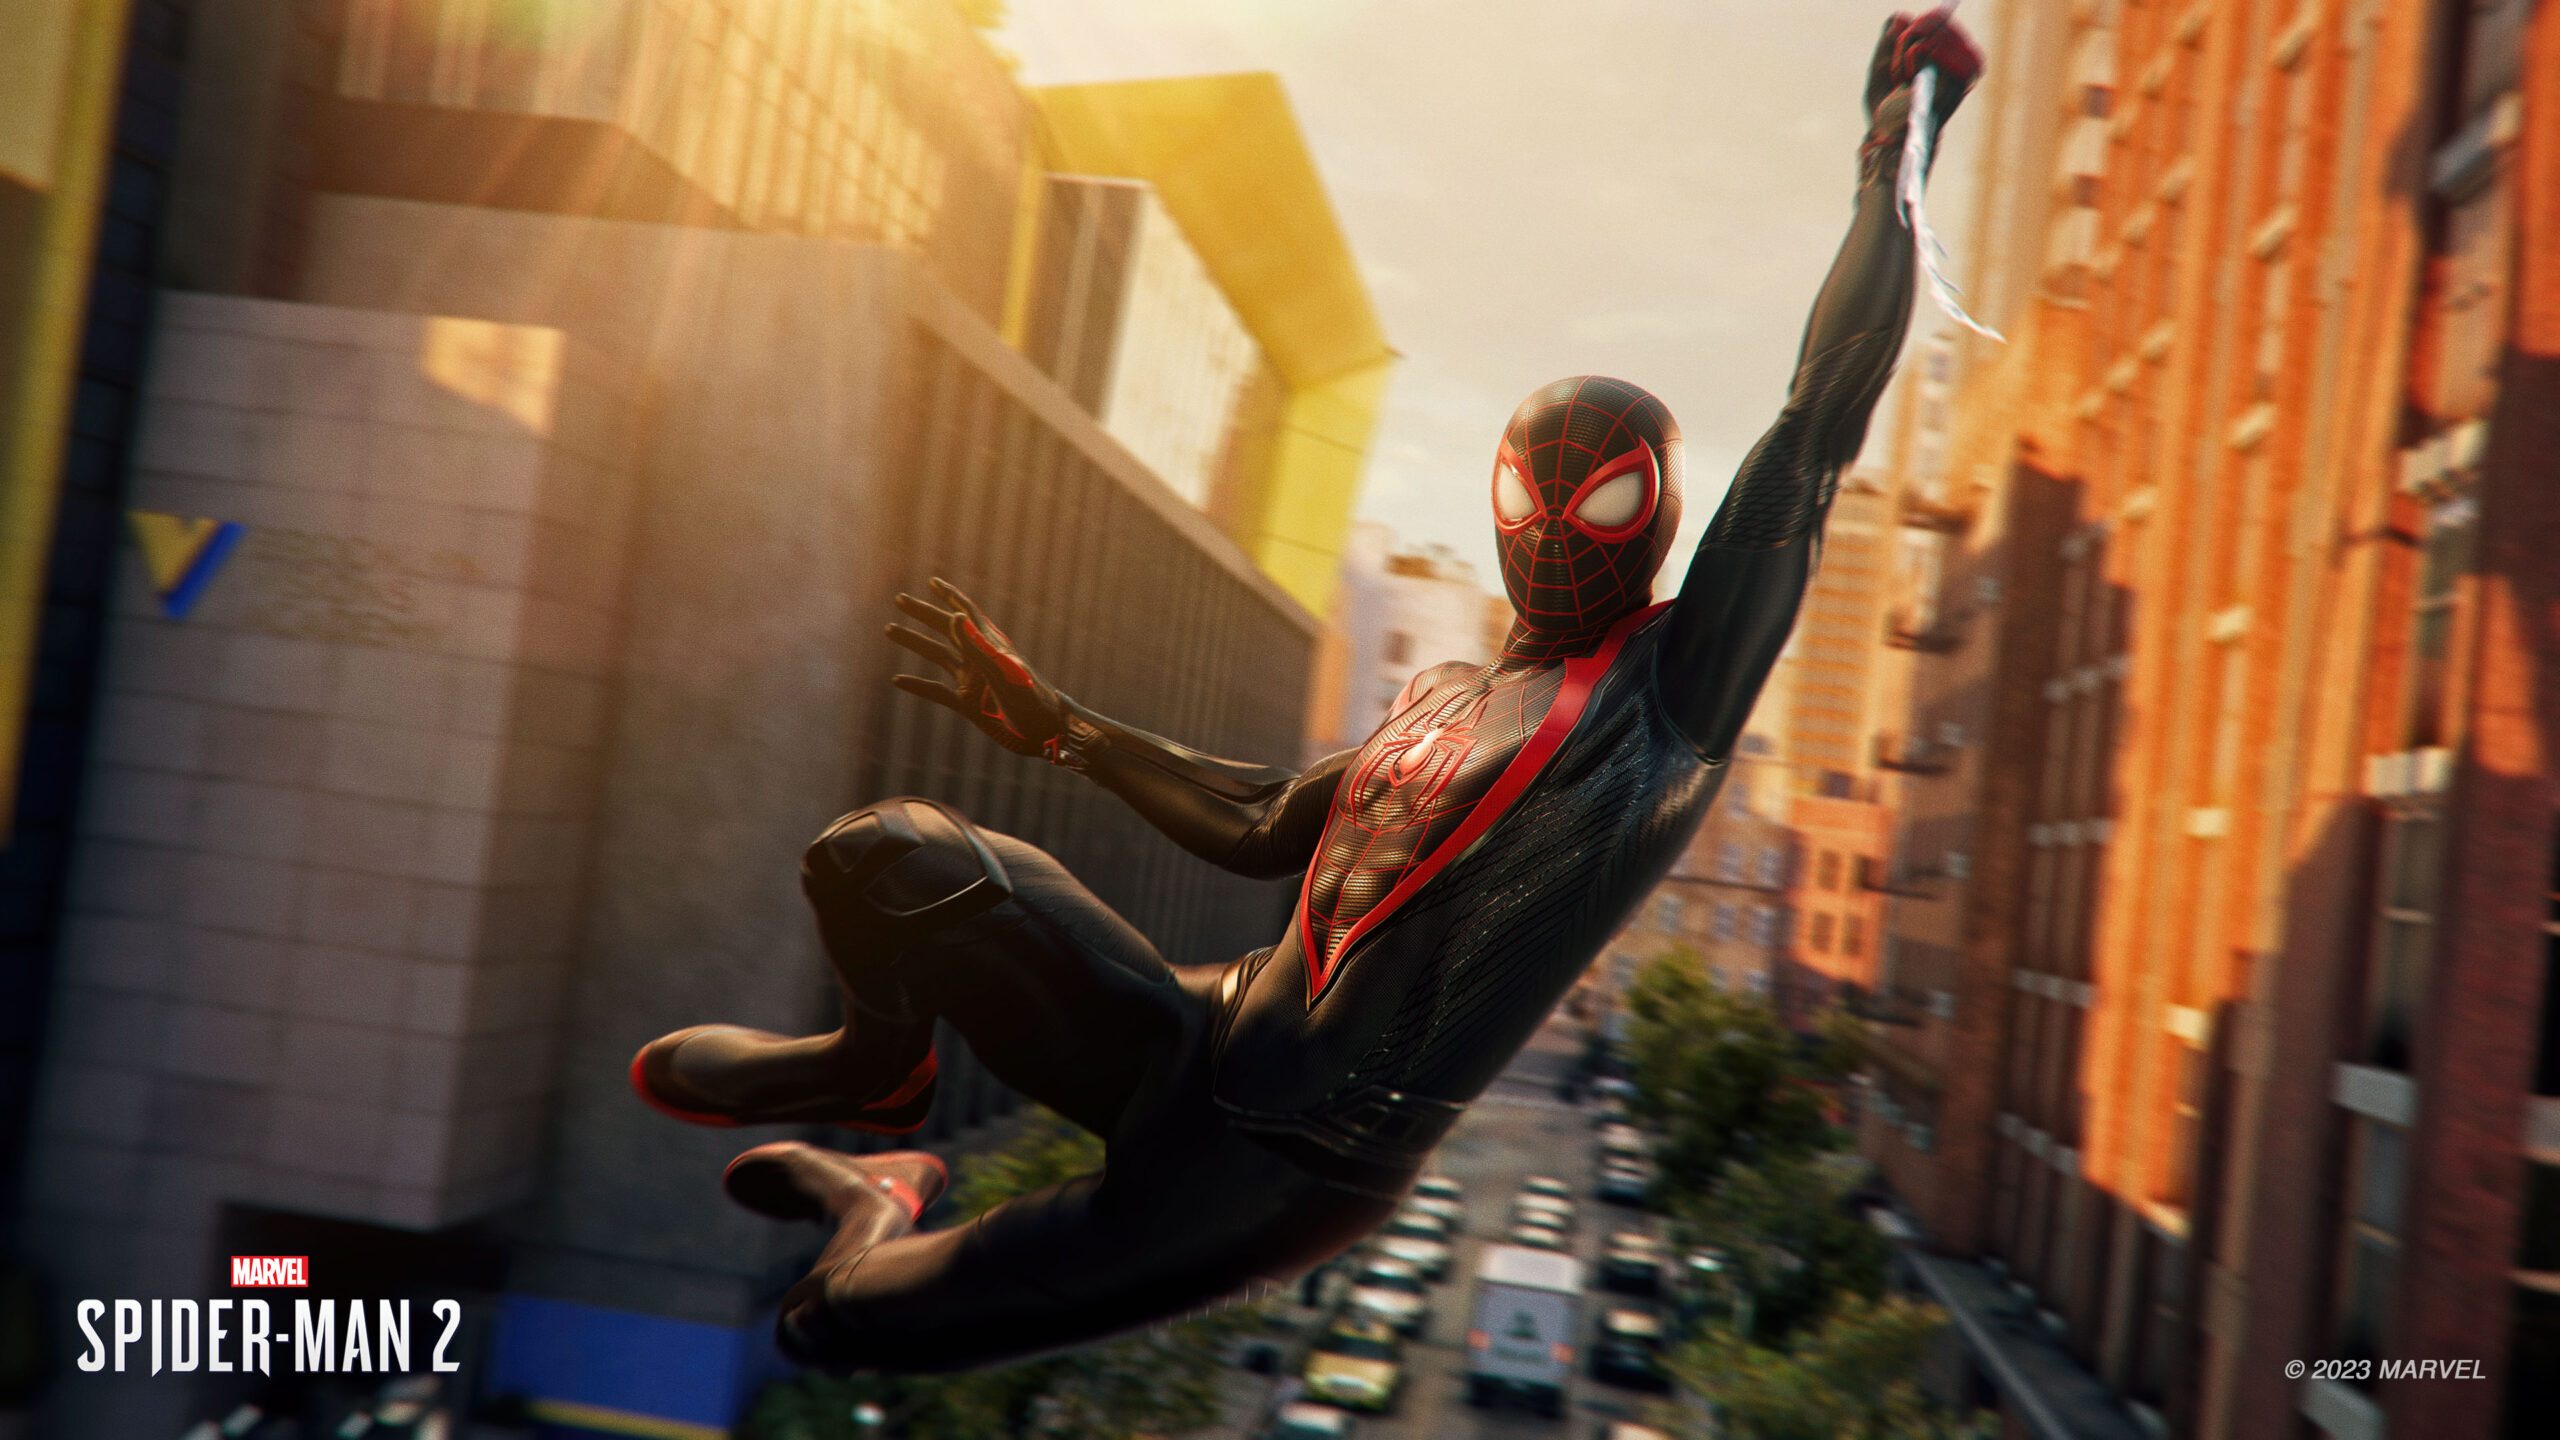 Marvel’s Spider-Man 2 builds on accessibility in previous titles and introduces new features